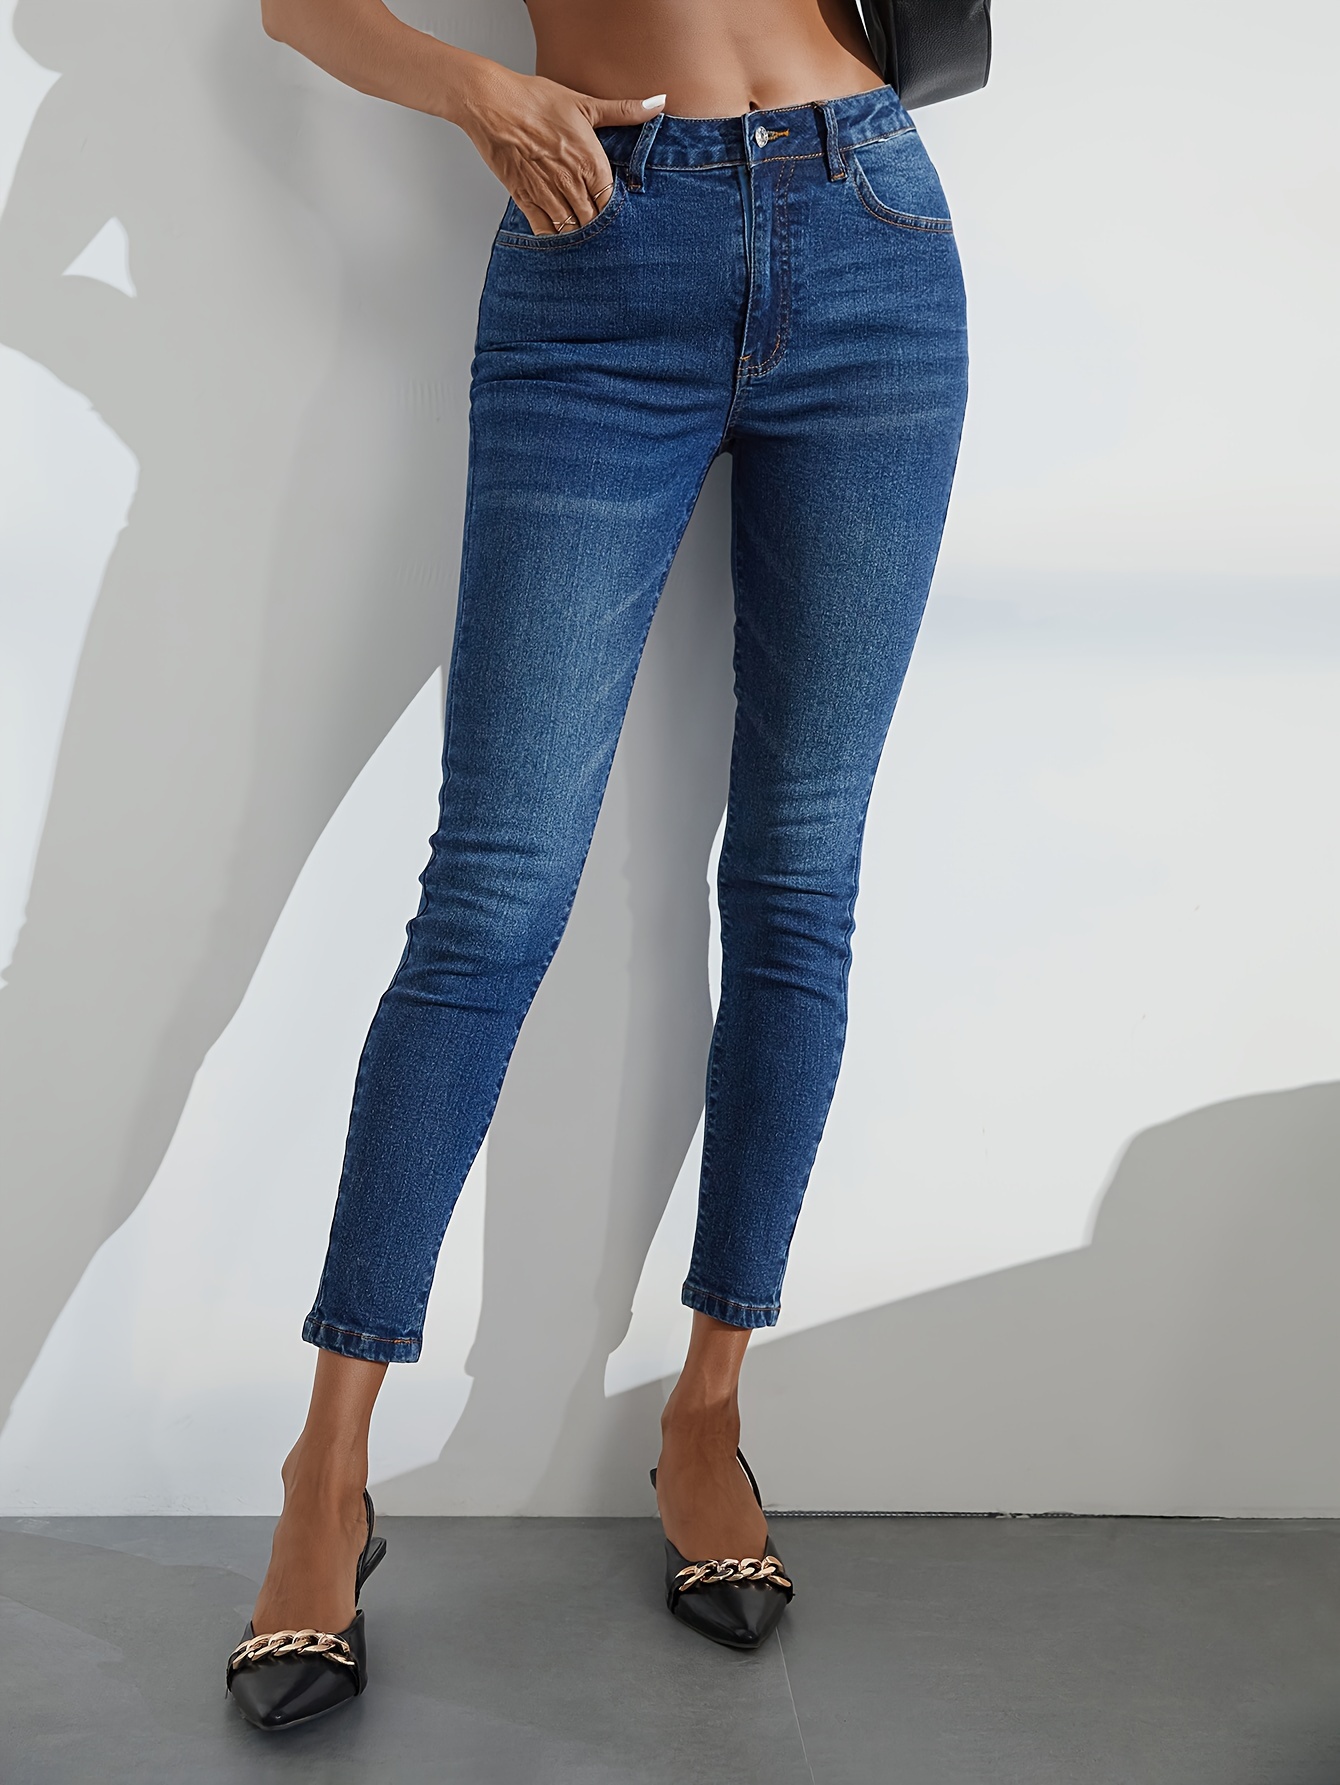 High * Washed Grey Skinny Jeans, Cropped Stretchy Tight Fit High Waist  Denim Pants, Women's Denim Jeans & Clothing